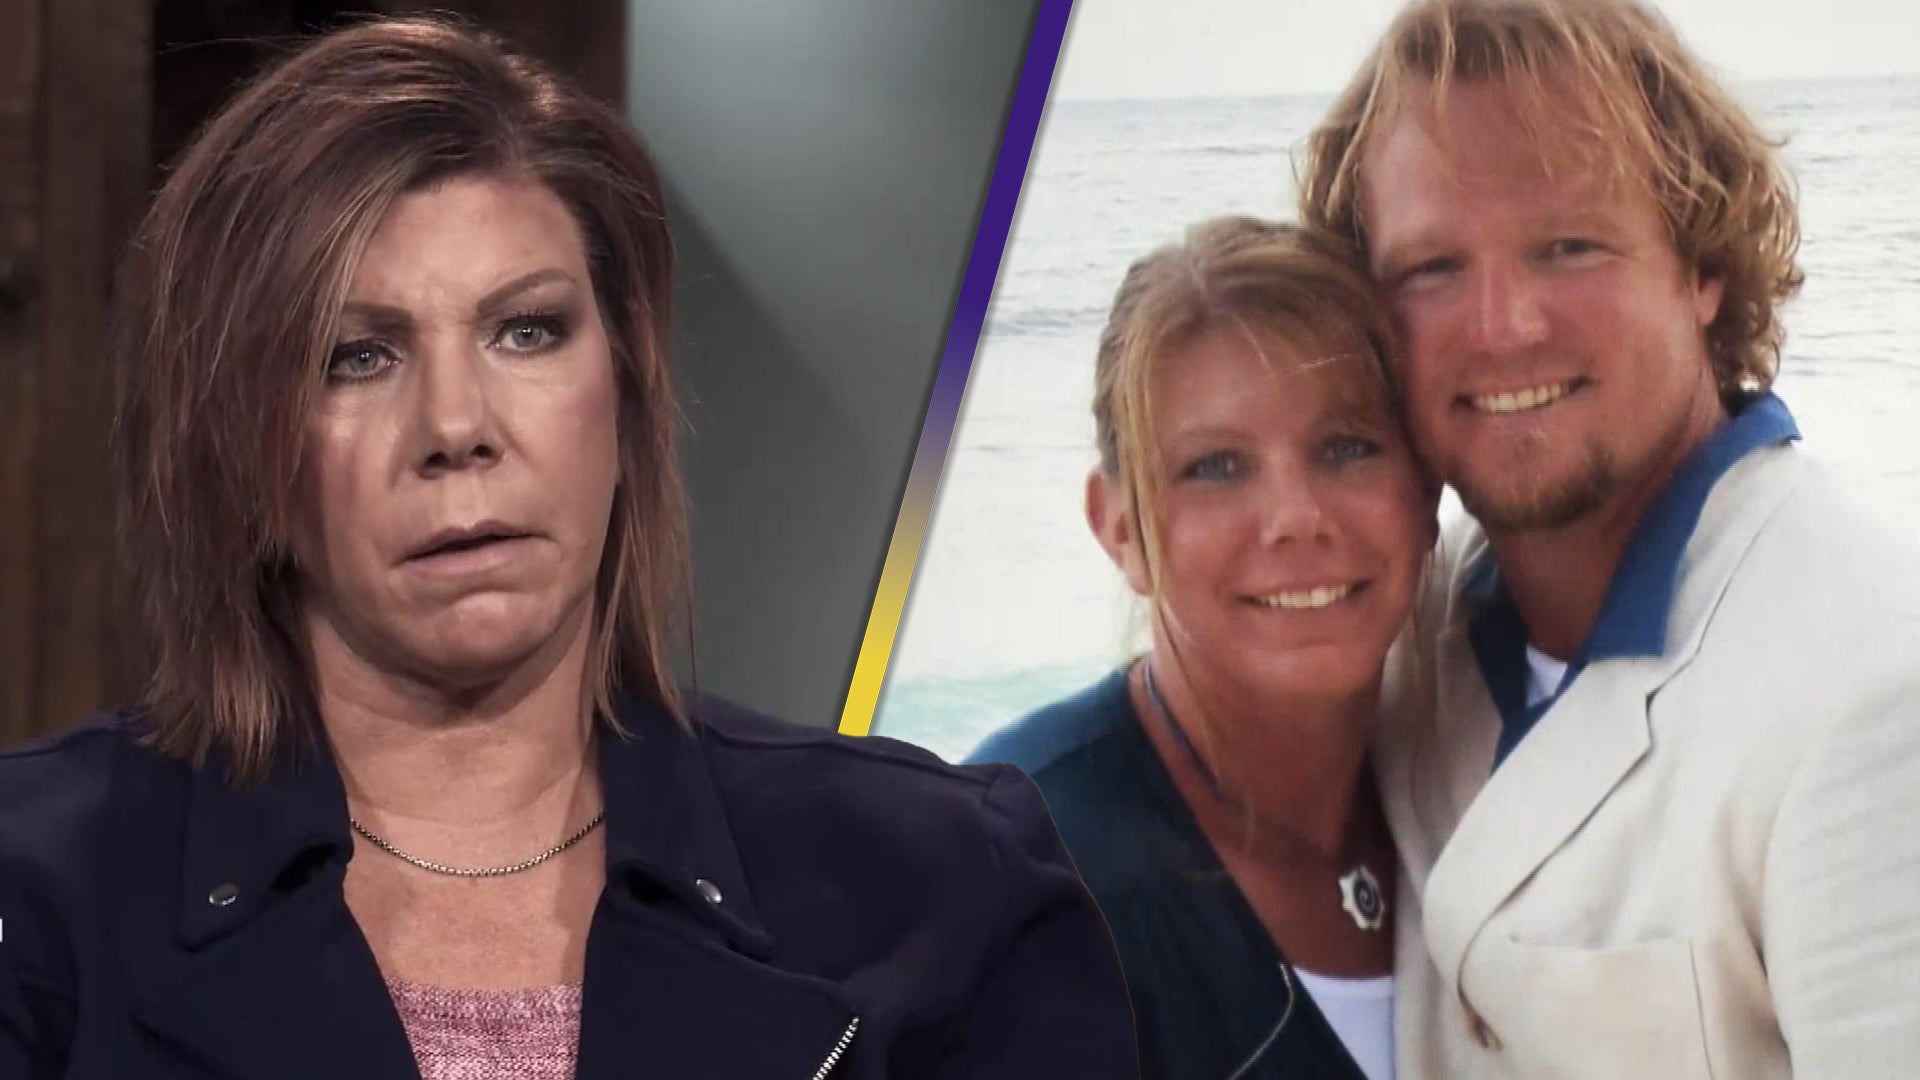 Sister Wives' Christine Brown Laughs at 'First Wives Club' Meme